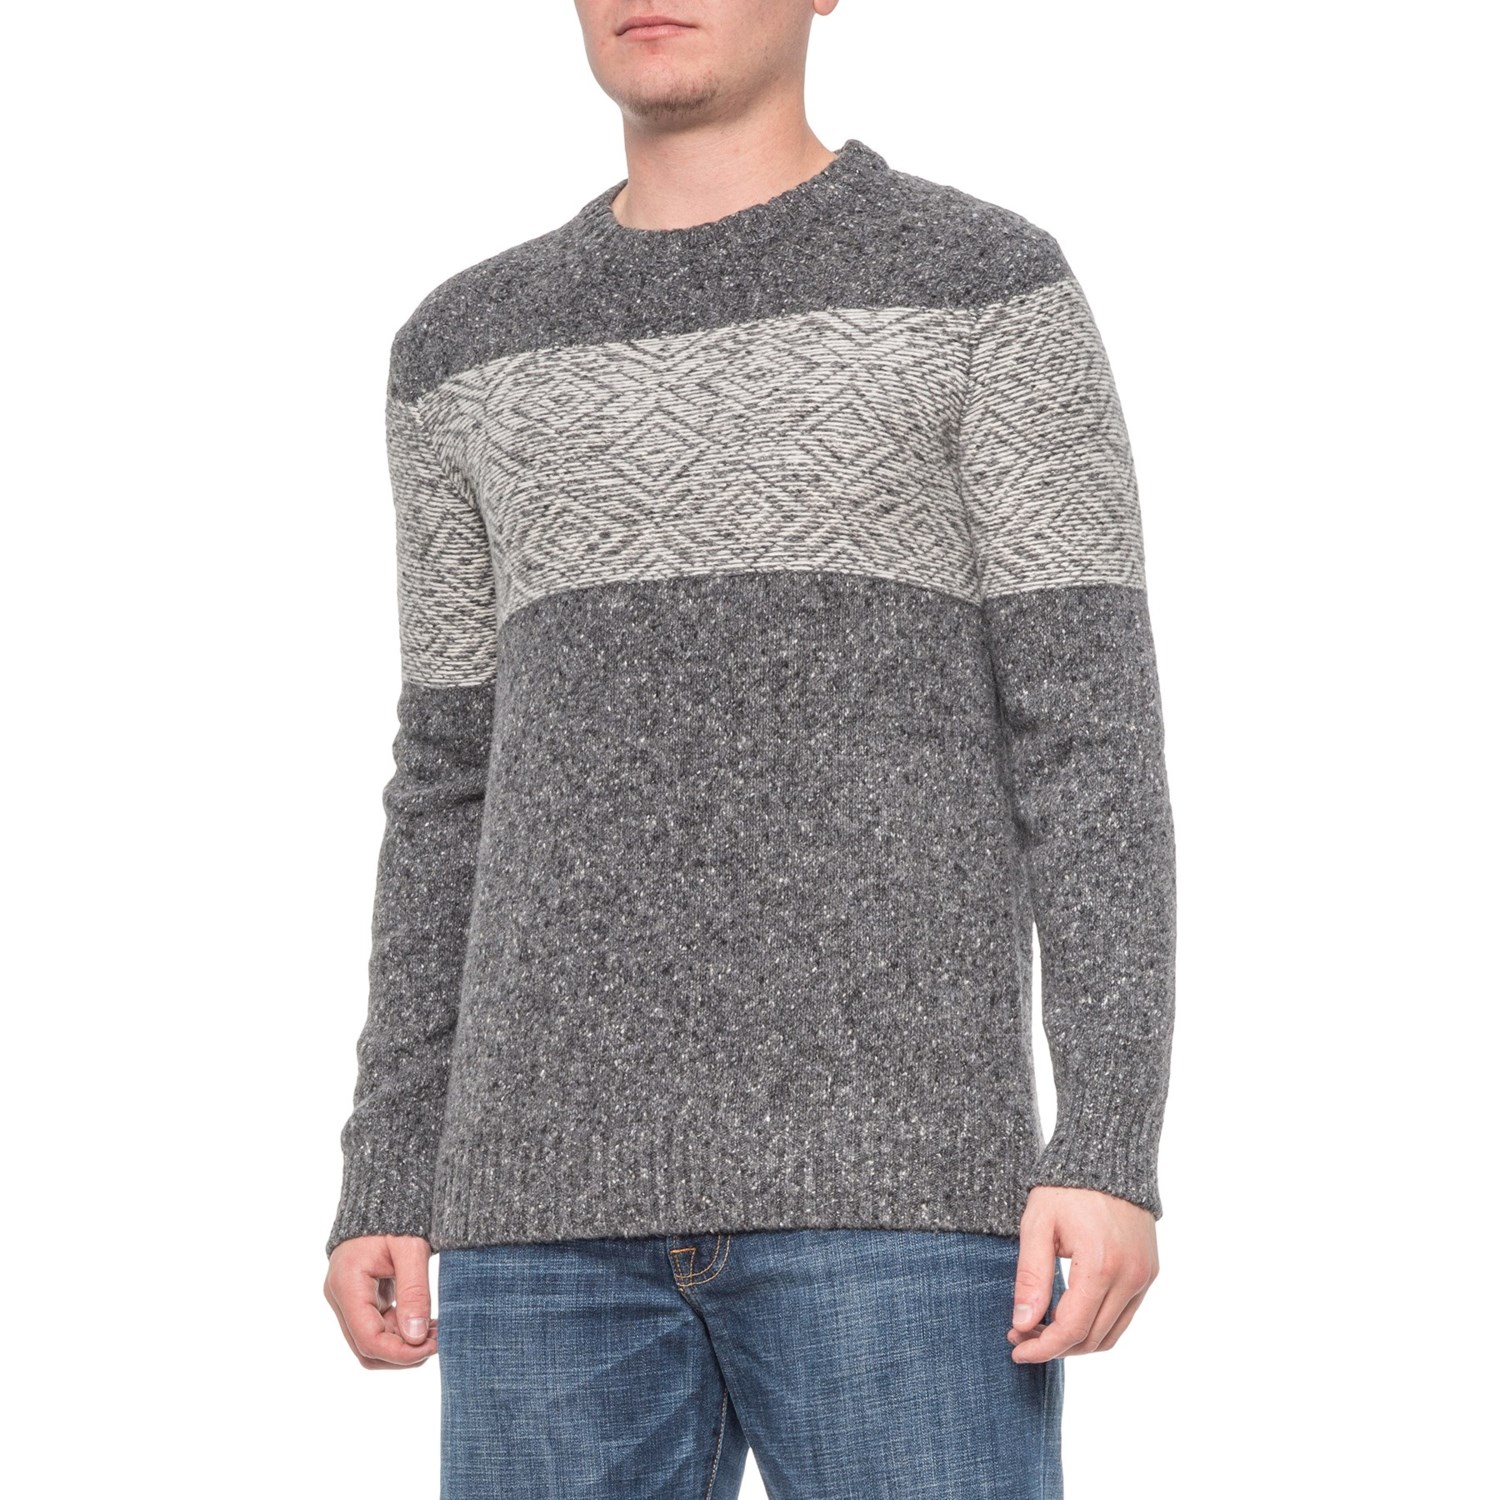 Luca Nobili Made in Italy Snowflake Print Sweater (For Men) - Save 42%